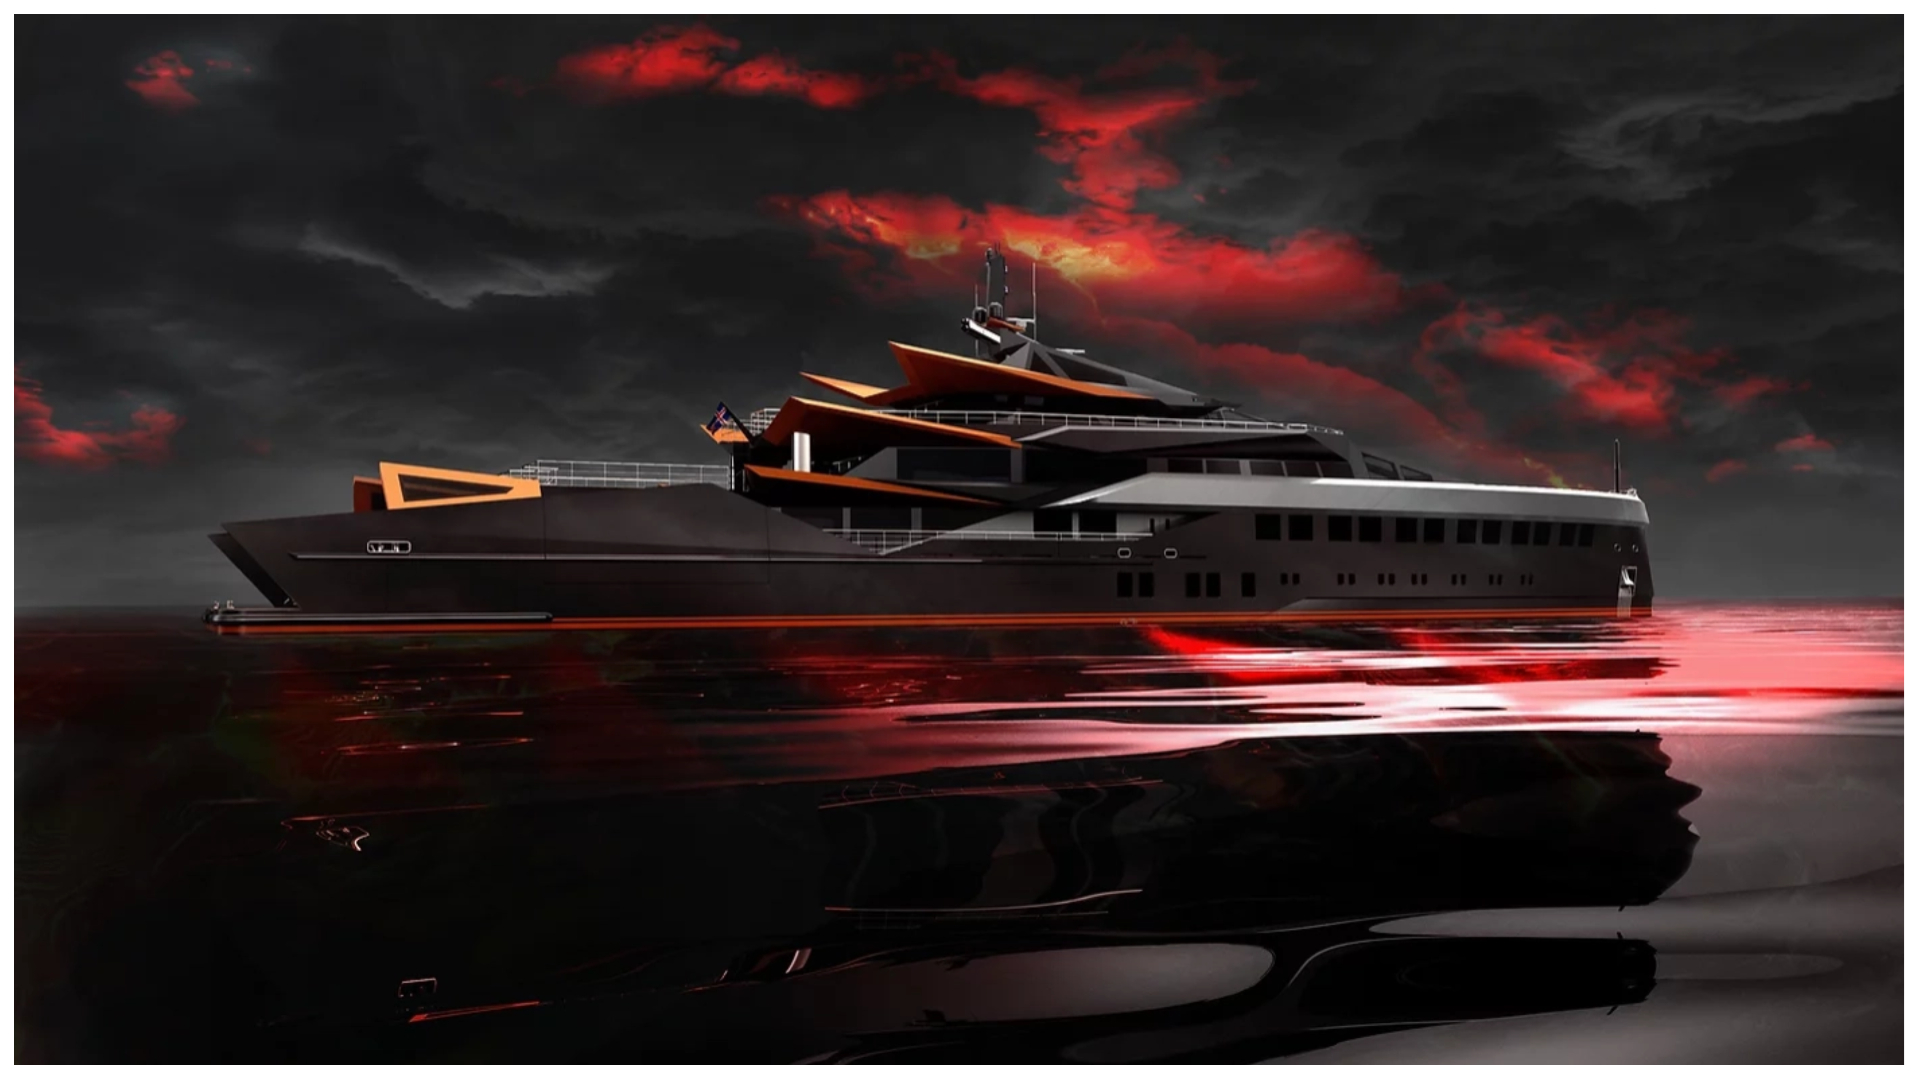 Must See ‘Forge’ Super Yacht Modeled in Shape of Volcano